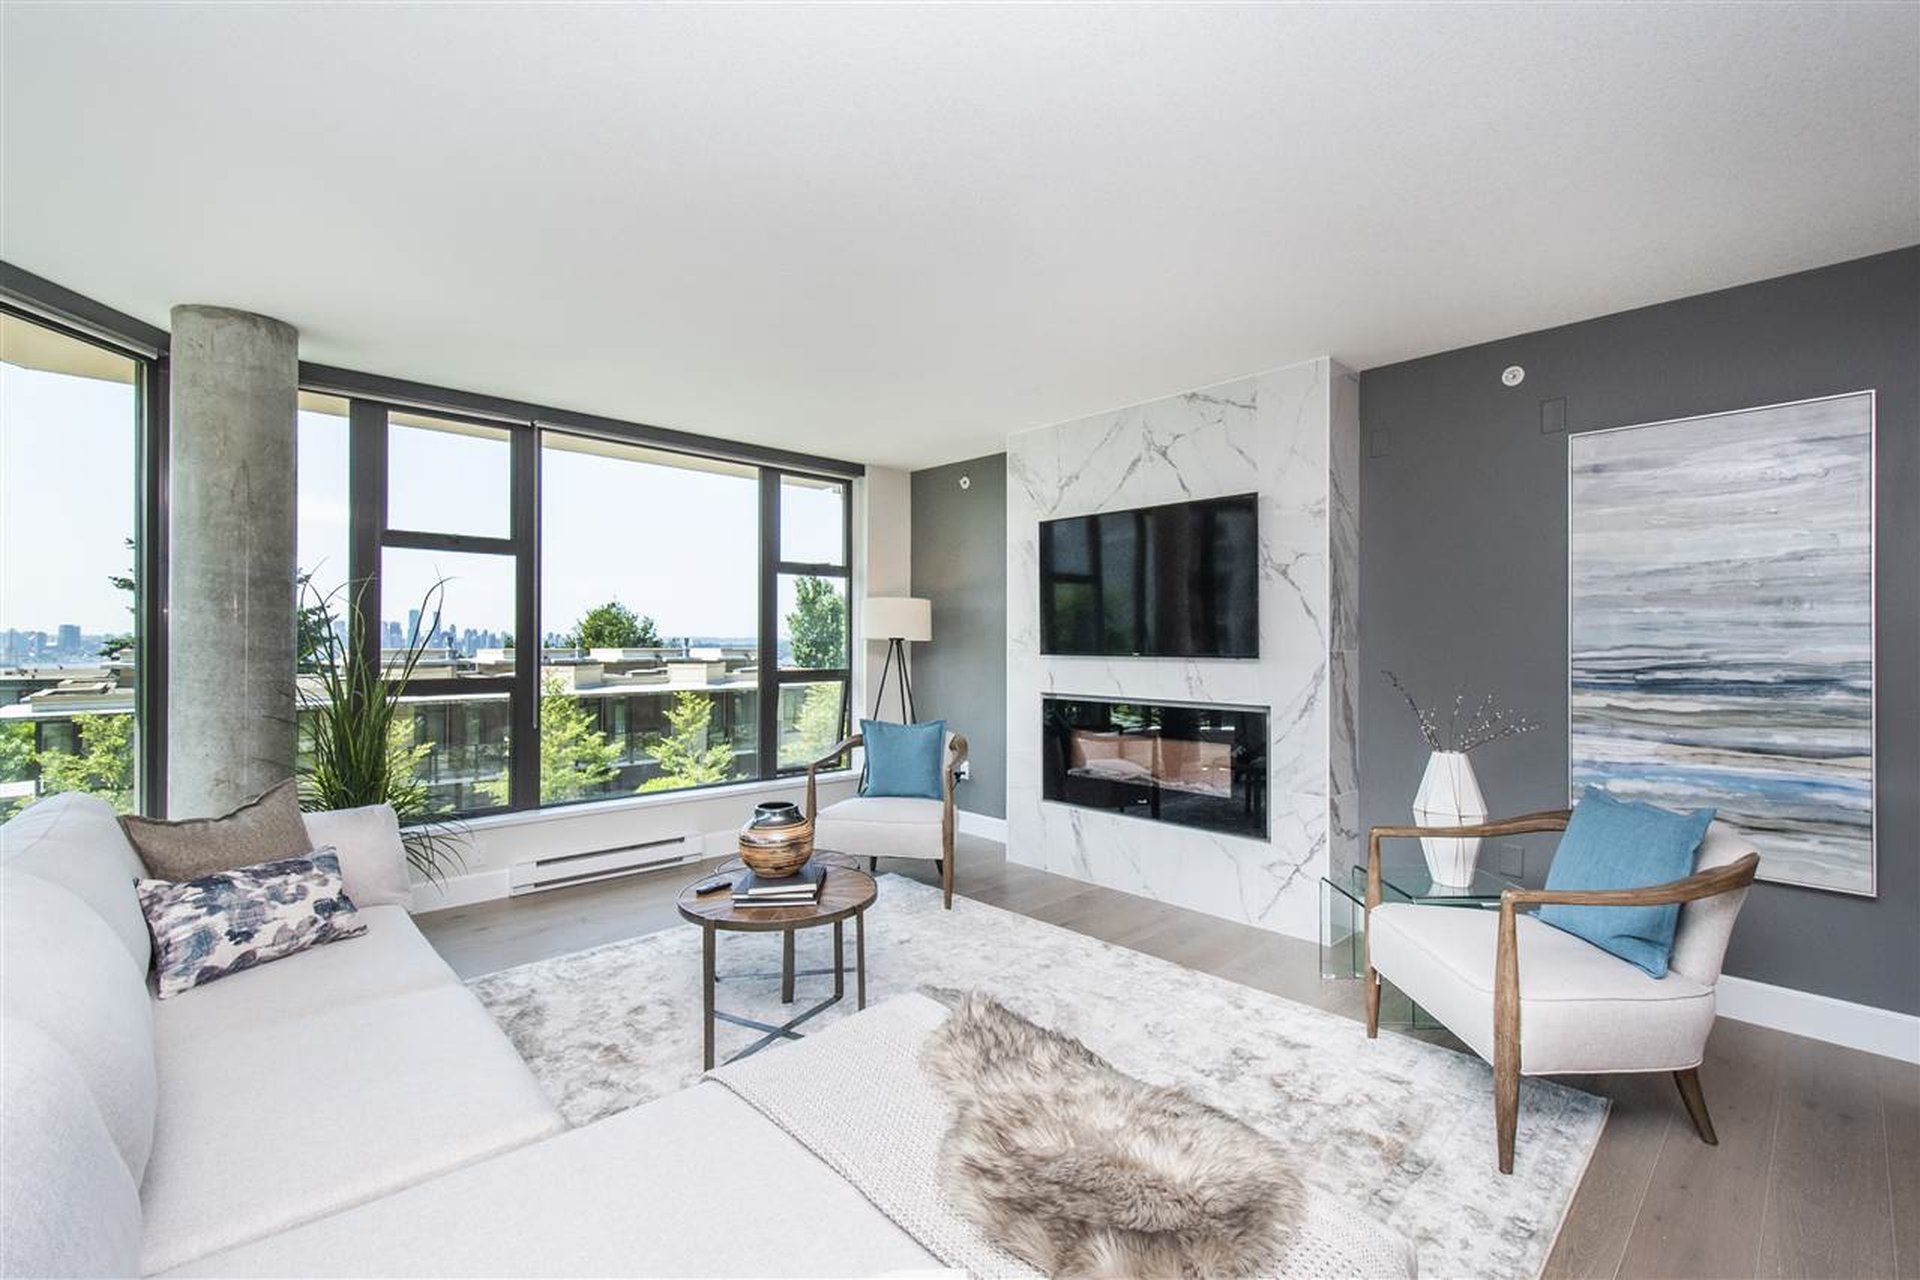 The Top 10 North Vancouver Condo Sales in 2019 (by sale price)